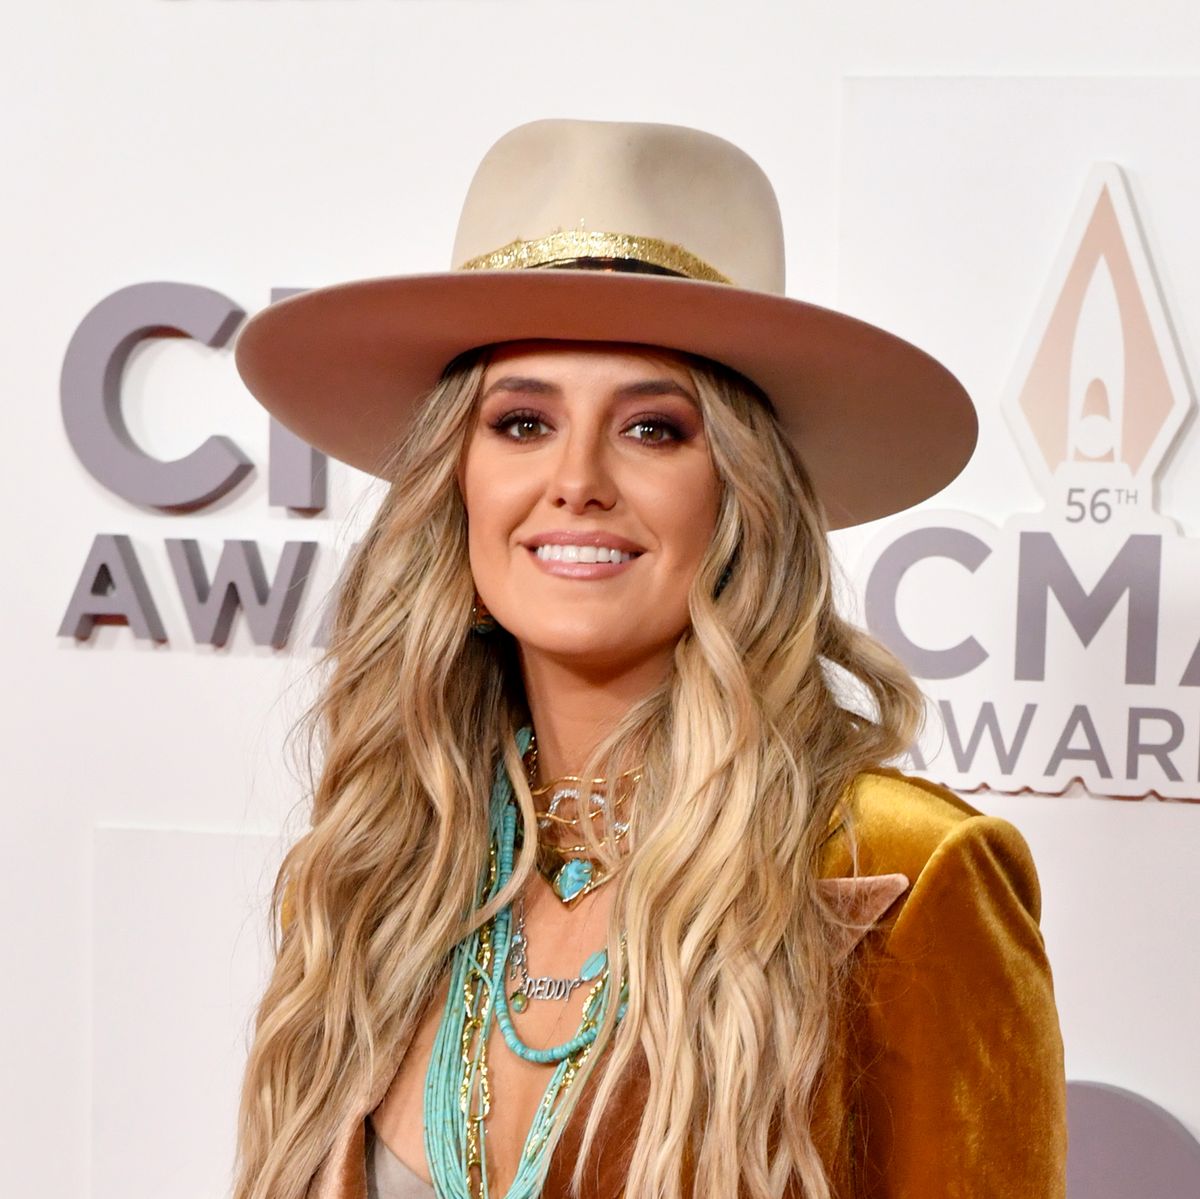 Lainey Wilson Makes Headlines, Wears a SeeThrough Outfit Ahead of CMT